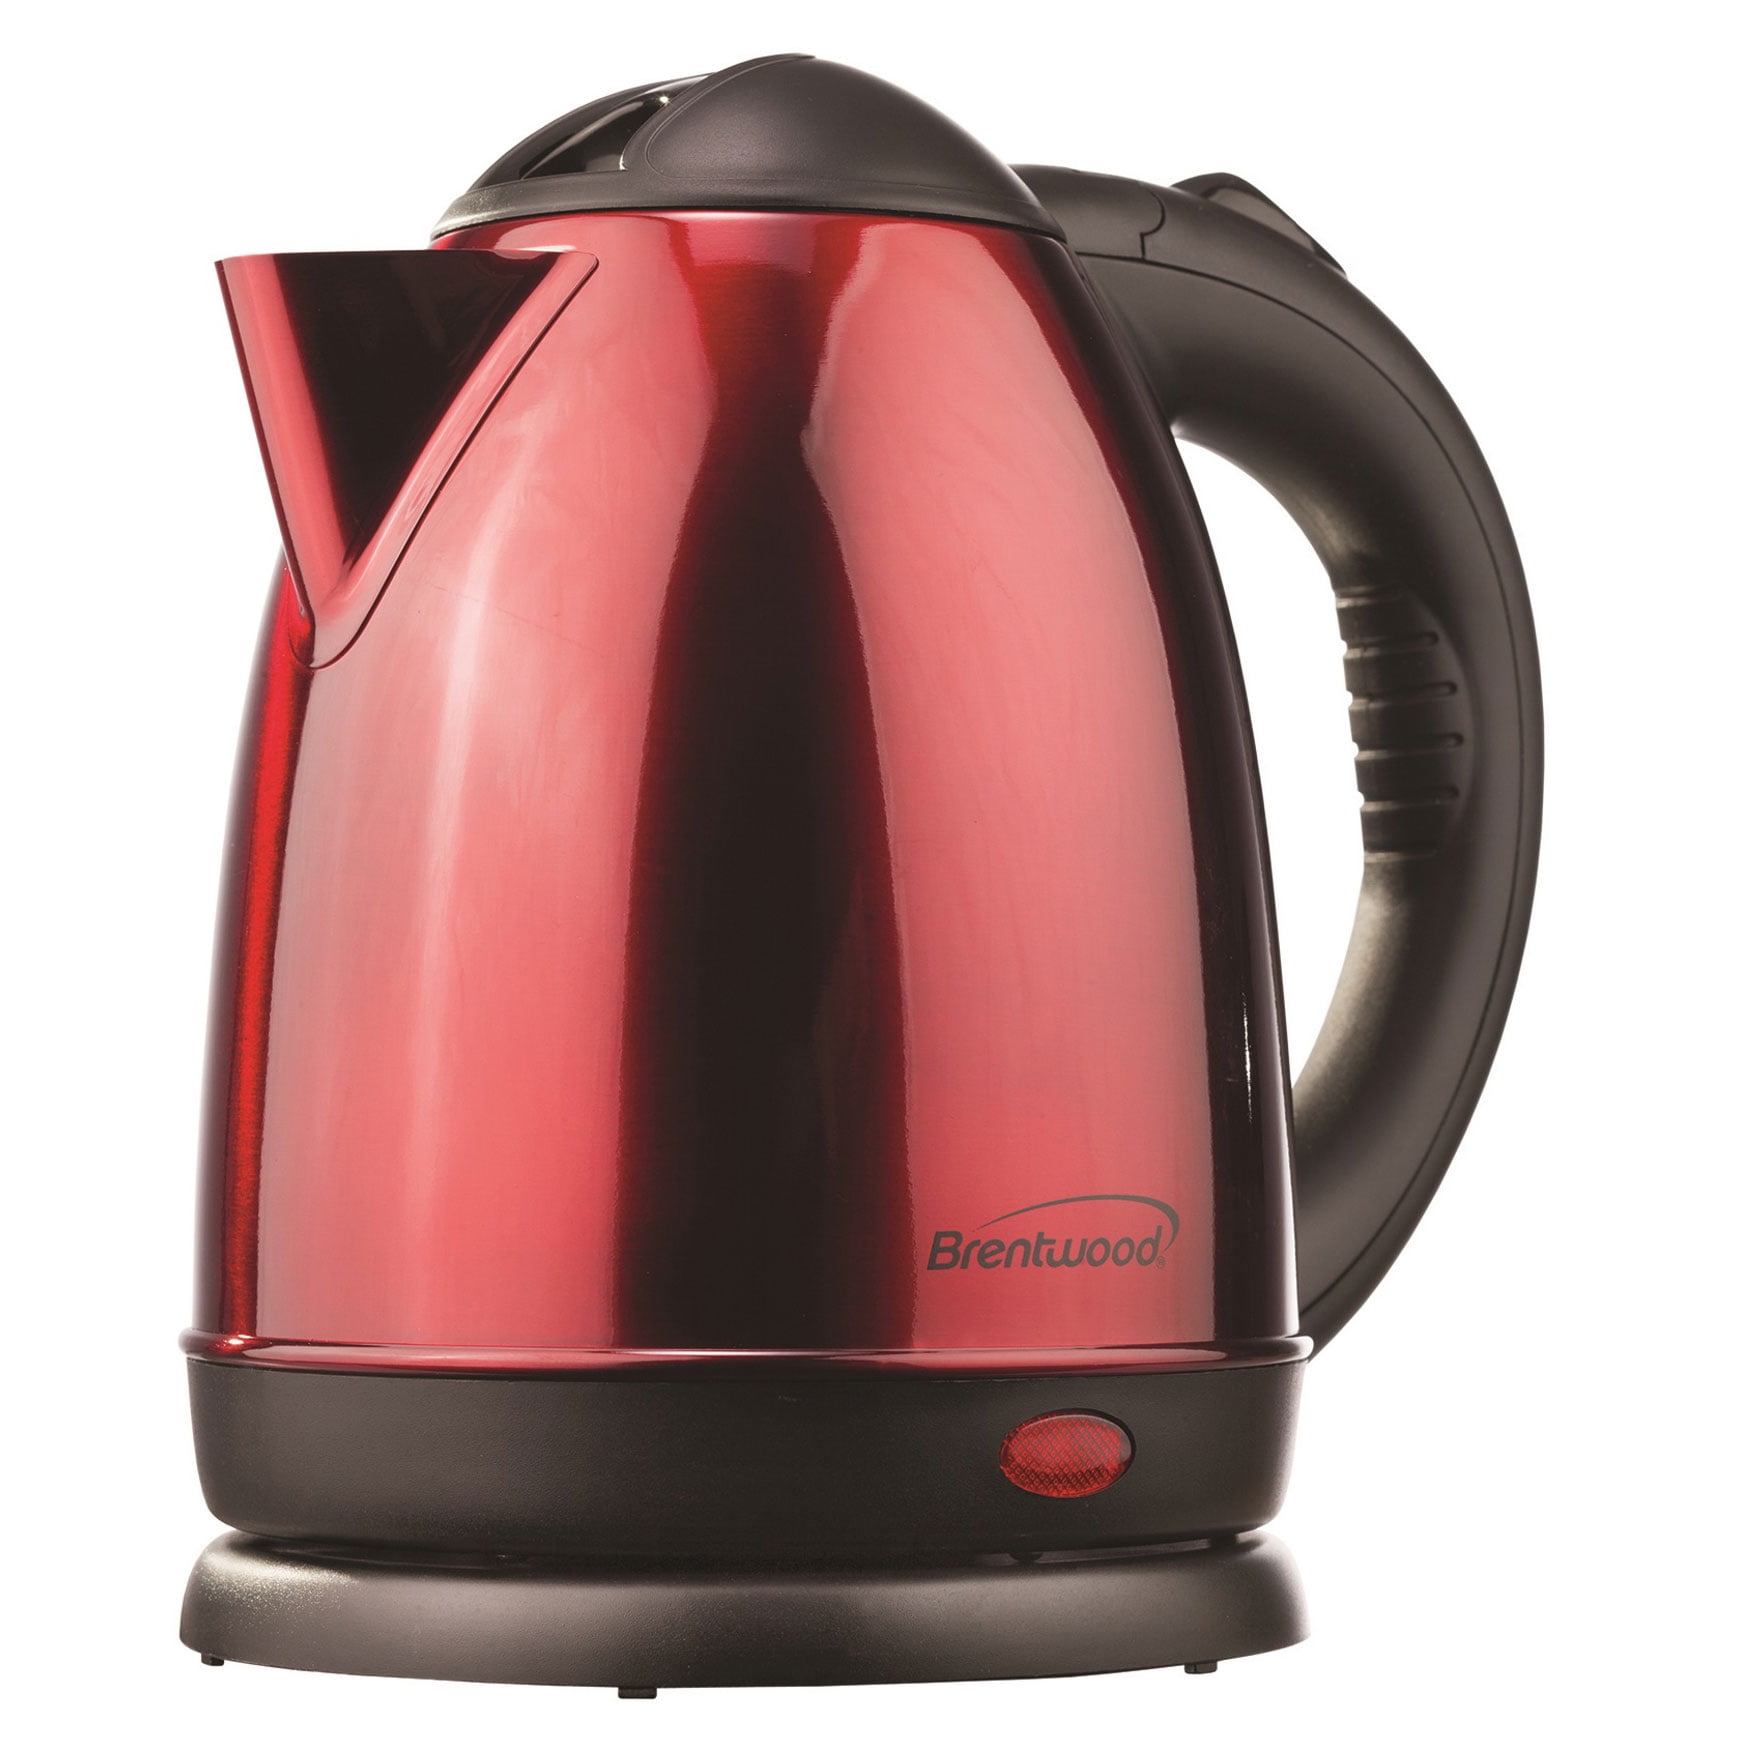 Brentwood KT-1796DS 1,500-Watt 1.79-Qt. Cordless Digital Stainless Steel Kettle with 5 Temperature Presets and Swivel